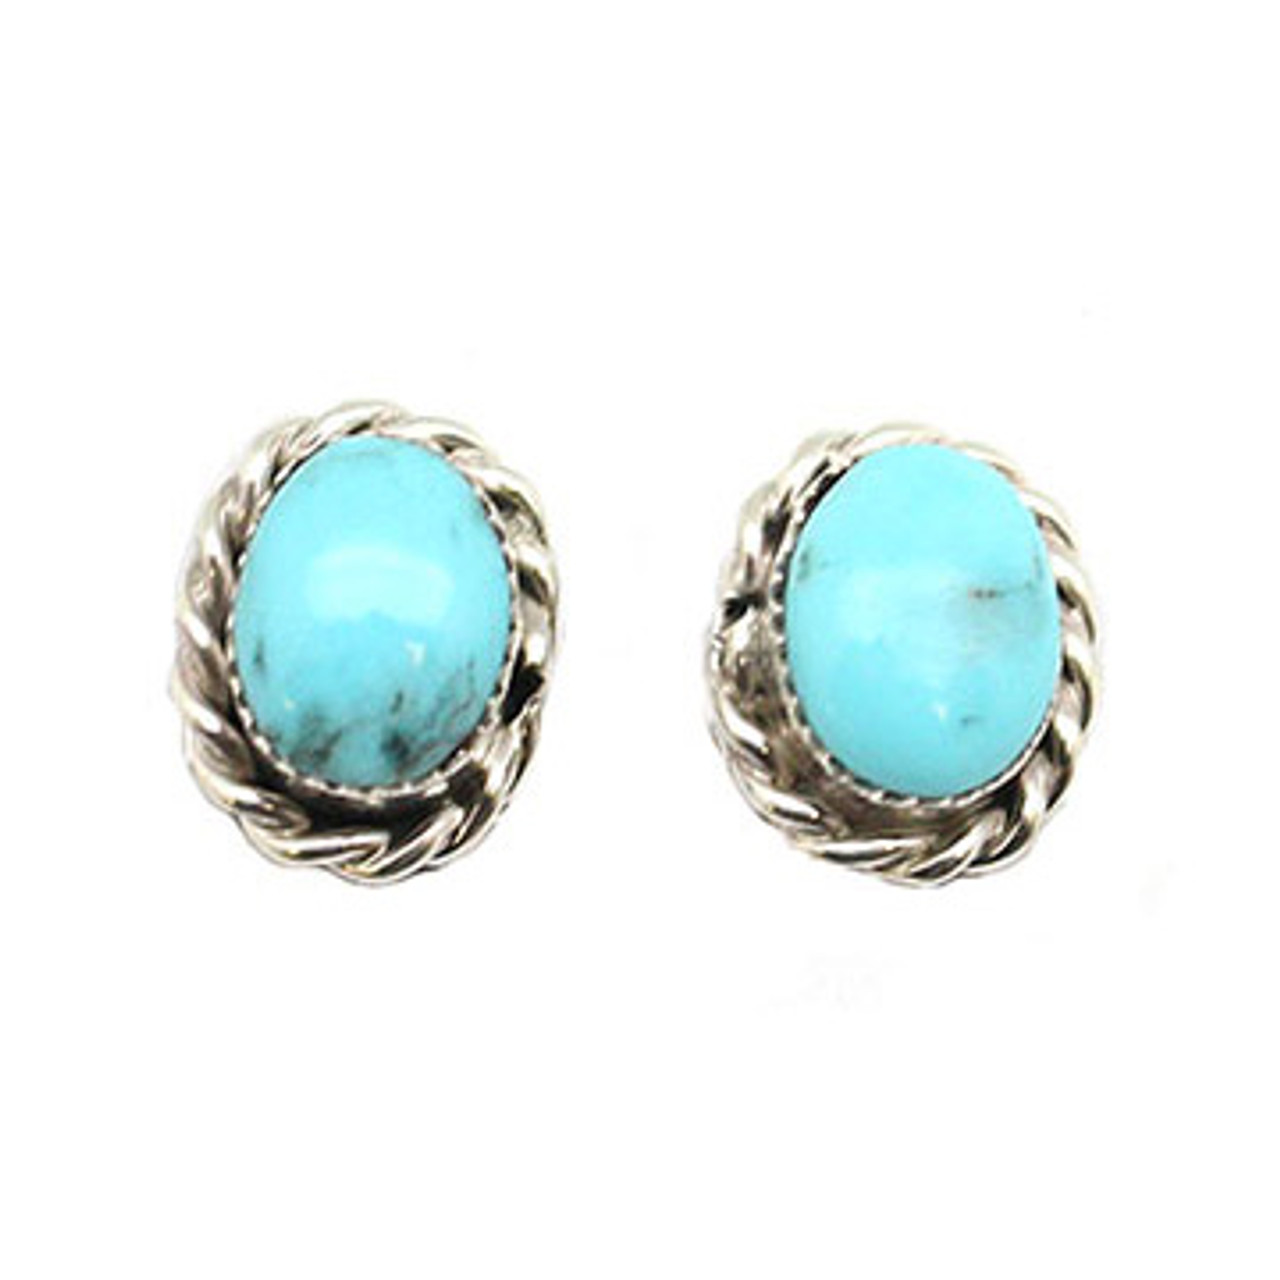 Hand-Cut Oval Turquoise Post Earrings